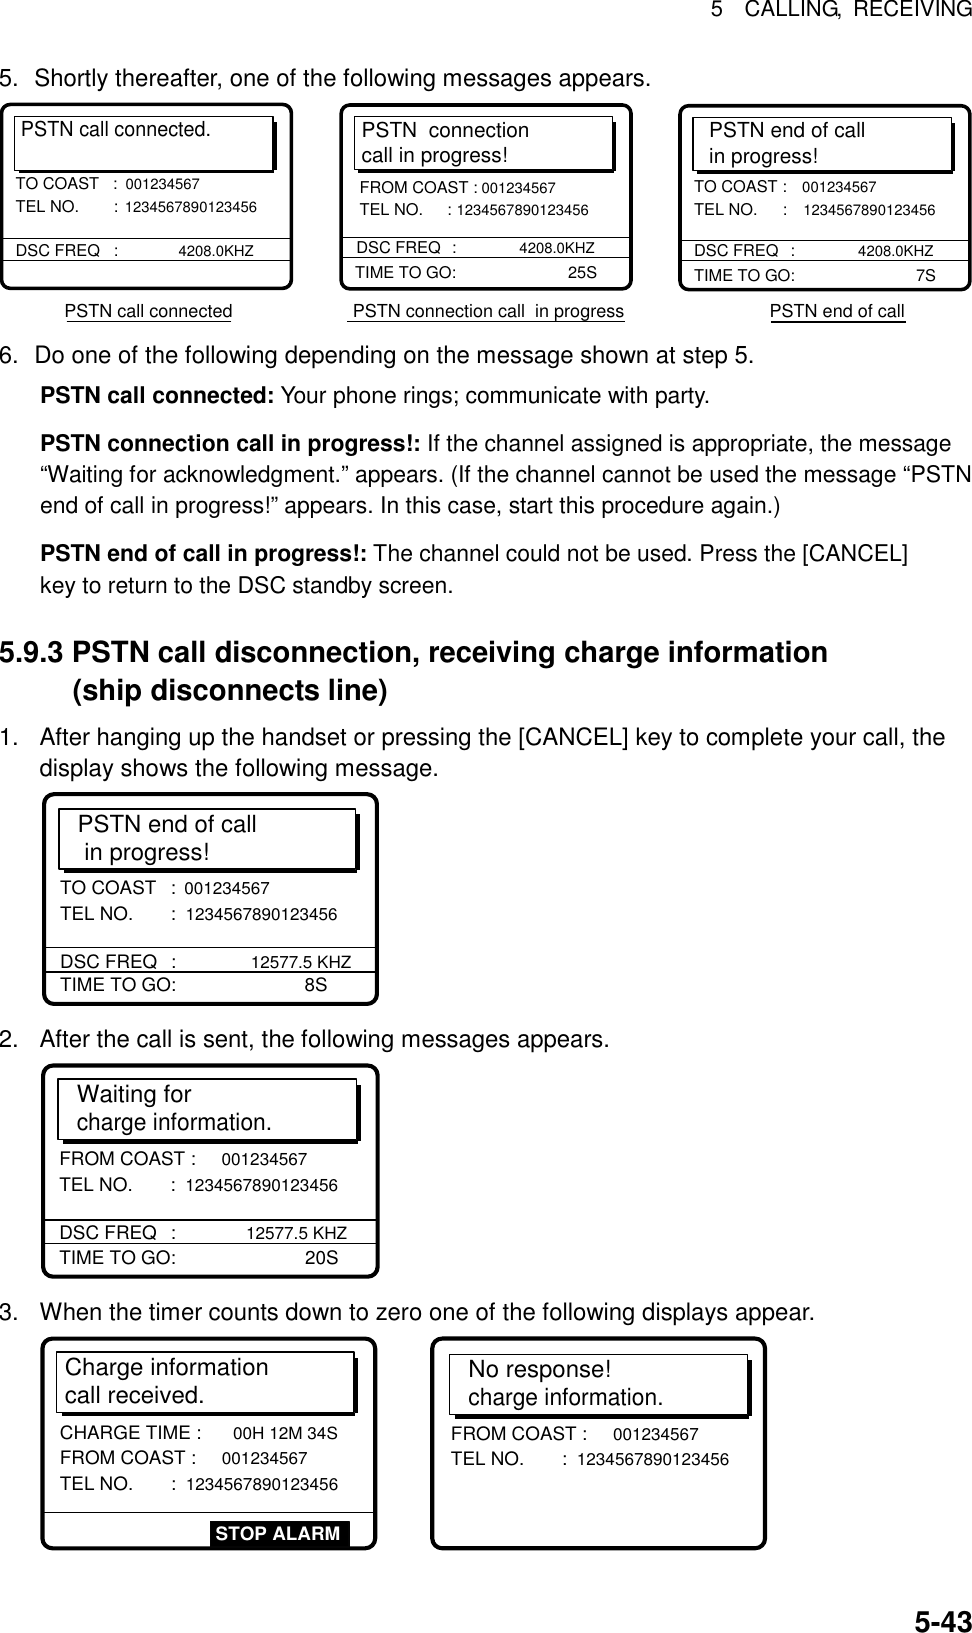 5  CALLING, RECEIVING  5-435.  Shortly thereafter, one of the following messages appears. PSTN call connected.DSC FREQ   : 4208.0KHZTO COAST   :001234567 TEL NO.  : 1234567890123456 PSTN call connected                        PSTN connection call  in progress                             PSTN end of callPSTN  connectioncall in progress!TIME TO GO:     25SDSC FREQ     :  4208.0KHZFROM COAST : 001234567 TEL NO.     : 1234567890123456PSTN end of callin progress!TIME TO GO:       7STO COAST : 001234567 TEL NO.  : 1234567890123456 DSC FREQ   : 4208.0KHZ 6.  Do one of the following depending on the message shown at step 5. PSTN call connected: Your phone rings; communicate with party. PSTN connection call in progress!: If the channel assigned is appropriate, the message “Waiting for acknowledgment.” appears. (If the channel cannot be used the message “PSTN end of call in progress!” appears. In this case, start this procedure again.)   PSTN end of call in progress!: The channel could not be used. Press the [CANCEL] key to return to the DSC standby screen.  5.9.3 PSTN call disconnection, receiving charge information (ship disconnects line) 1.  After hanging up the handset or pressing the [CANCEL] key to complete your call, the display shows the following message.   PSTN end of call  in progress!TIME TO GO:     8STO COAST :  001234567 TEL NO.      :  1234567890123456 DSC FREQ     :  12577.5 KHZ 2.  After the call is sent, the following messages appears. Waiting for charge information.TIME TO GO:     20SFROM COAST : 001234567 TEL NO.      : 1234567890123456 DSC FREQ     : 12577.5 KHZ 3.  When the timer counts down to zero one of the following displays appear. Charge information call received.CHARGE TIME :  00H 12M 34S  FROM COAST :  001234567 TEL NO.      :  1234567890123456STOP ALARMNo response!charge information.FROM COAST :  001234567 TEL NO.      :  1234567890123456  